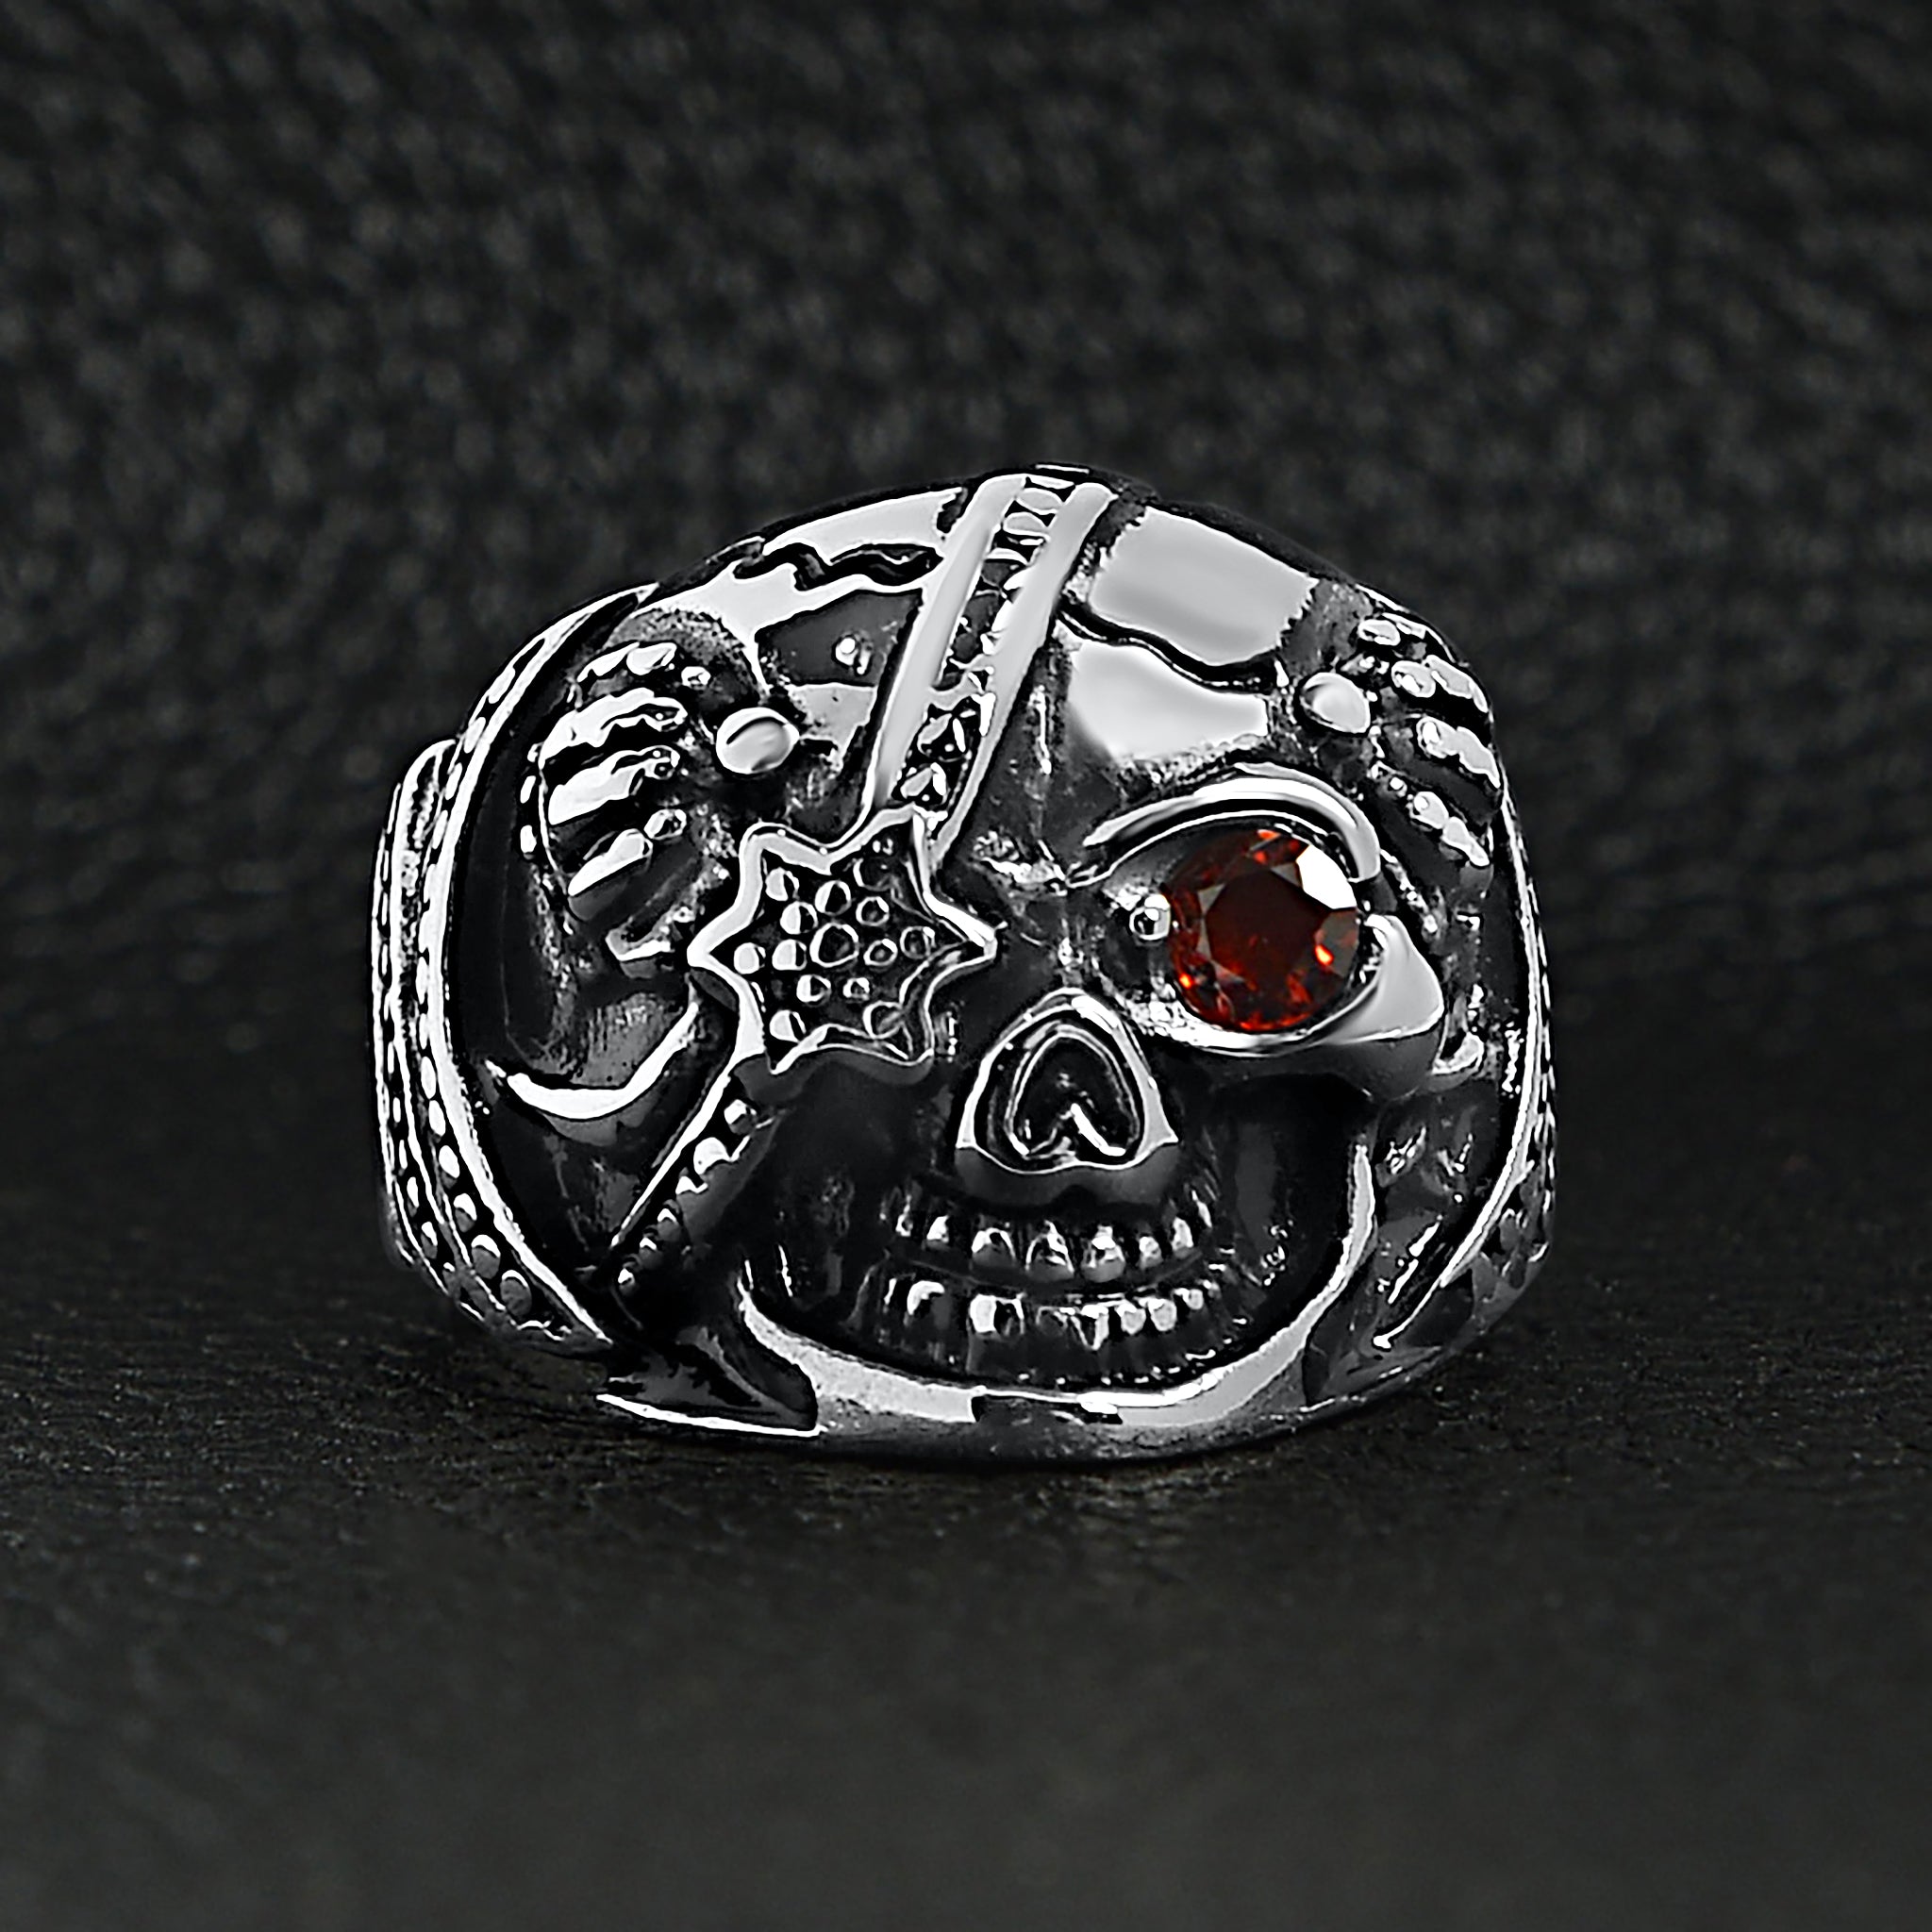 Stainless Steel Skull Ring with Red CZ Eye and Eyepatch - Unique and Stylish Jewelry for Men - Jewelry & Watches - Bijou Her -  -  - 